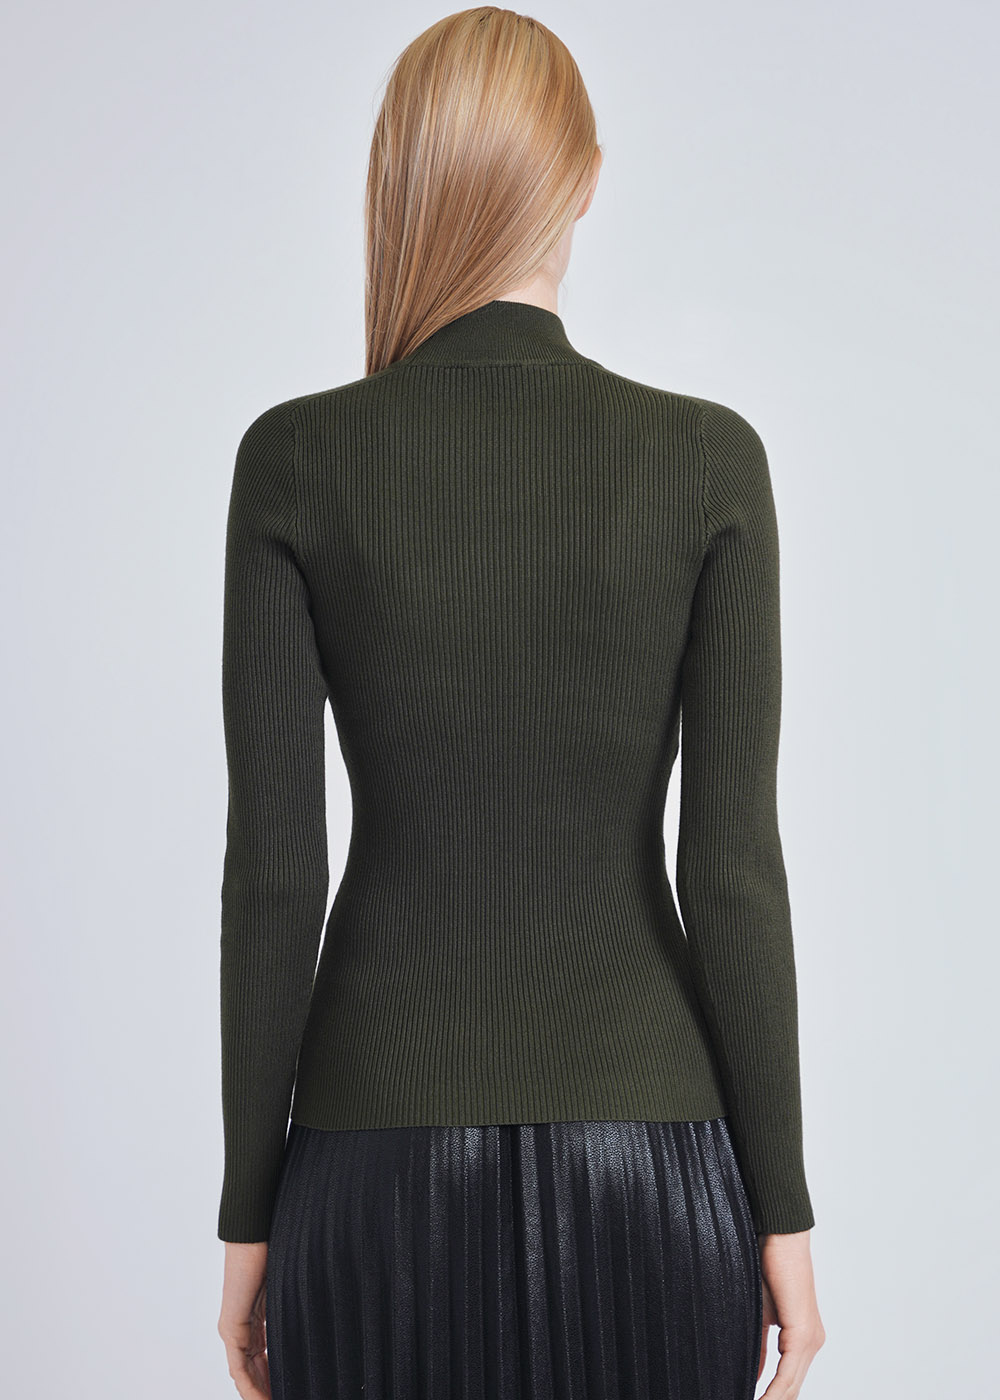 Classic Olive Close-Fit Ribbed High Neck Sweater